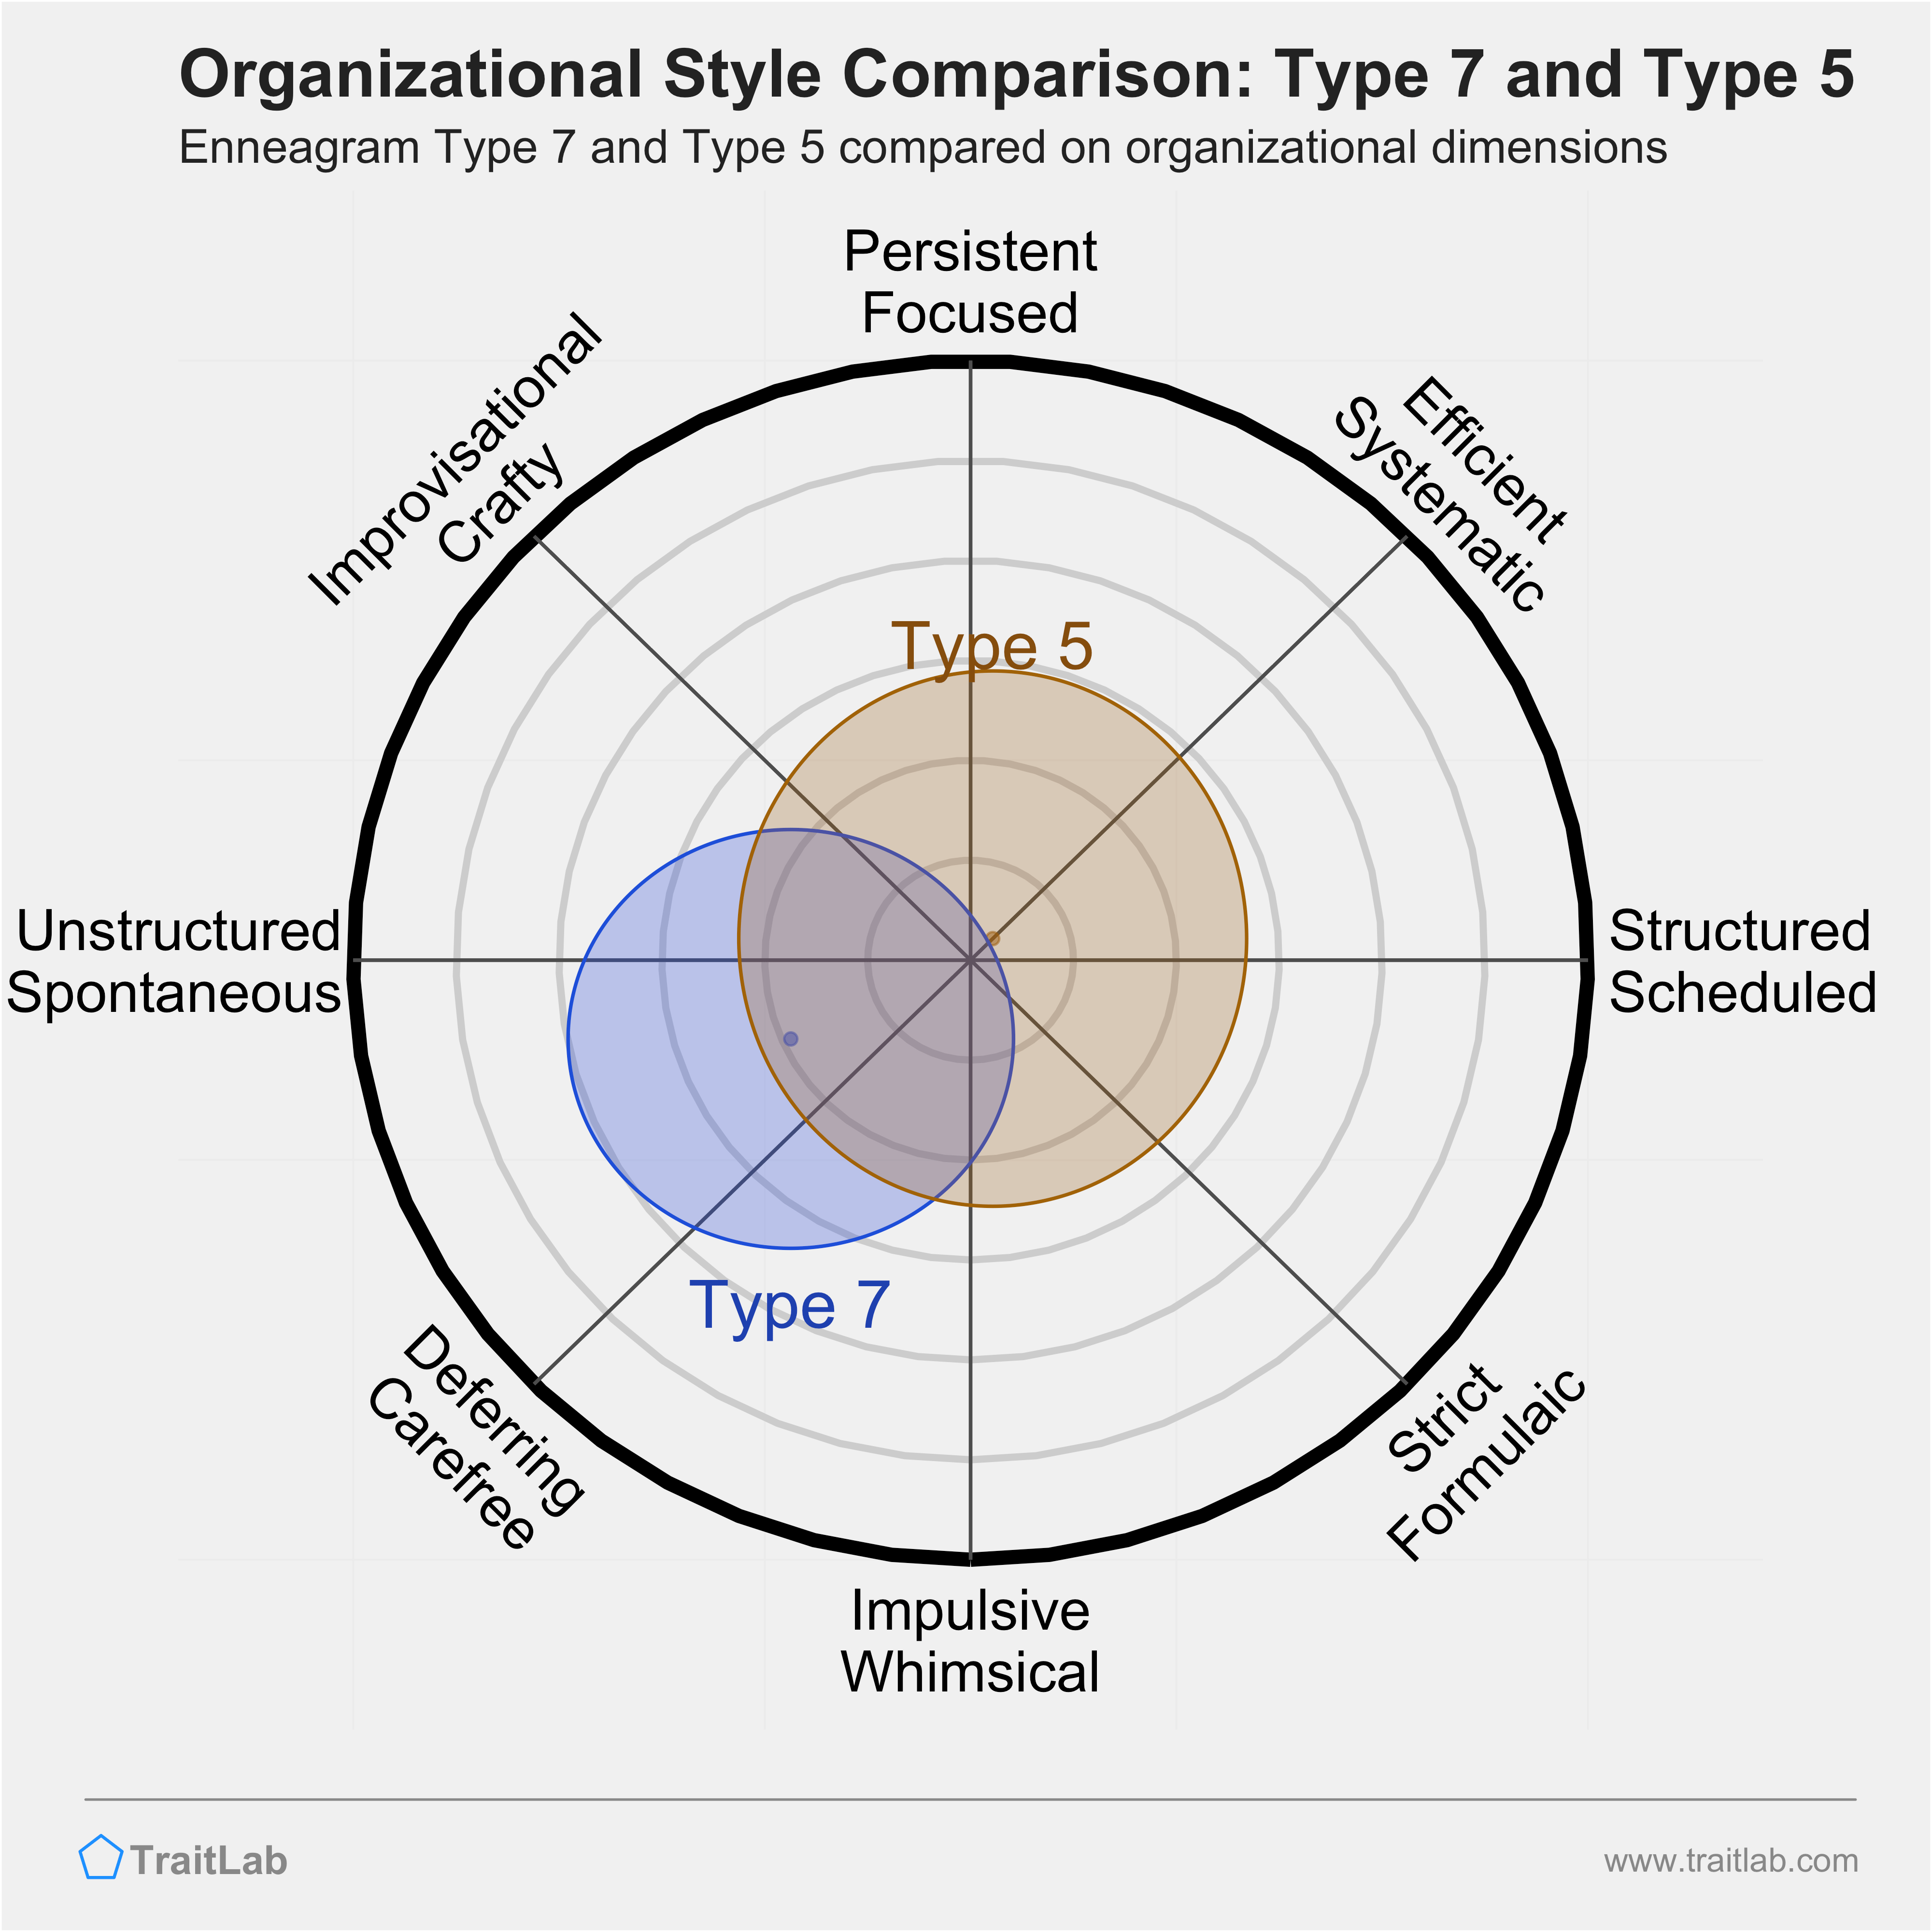 Type 7 and Type 5 comparison across organizational dimensions